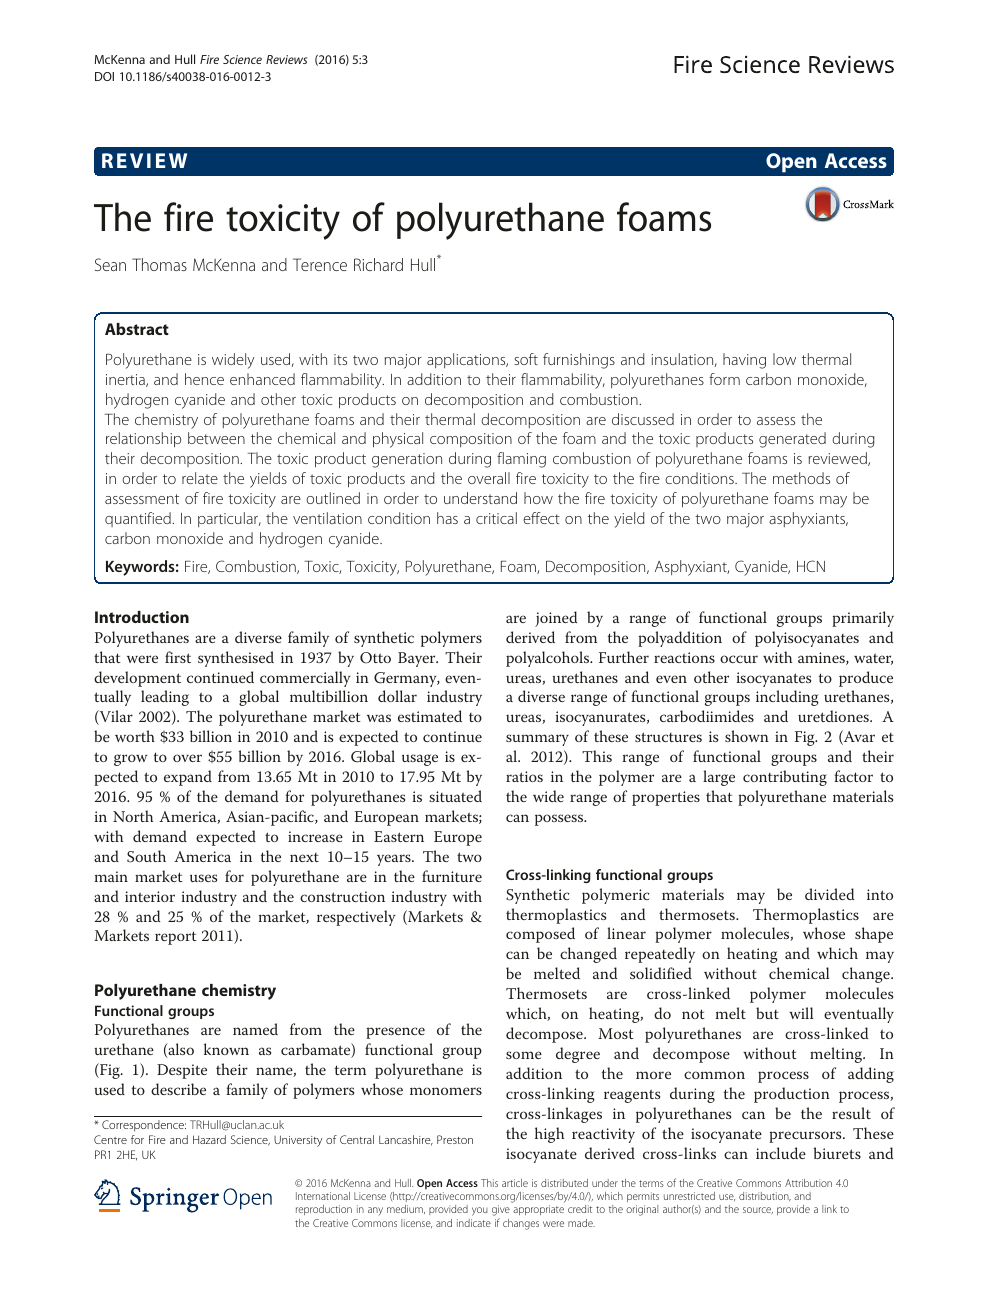 The Fire Toxicity Of Polyurethane Foams Topic Of Research Paper